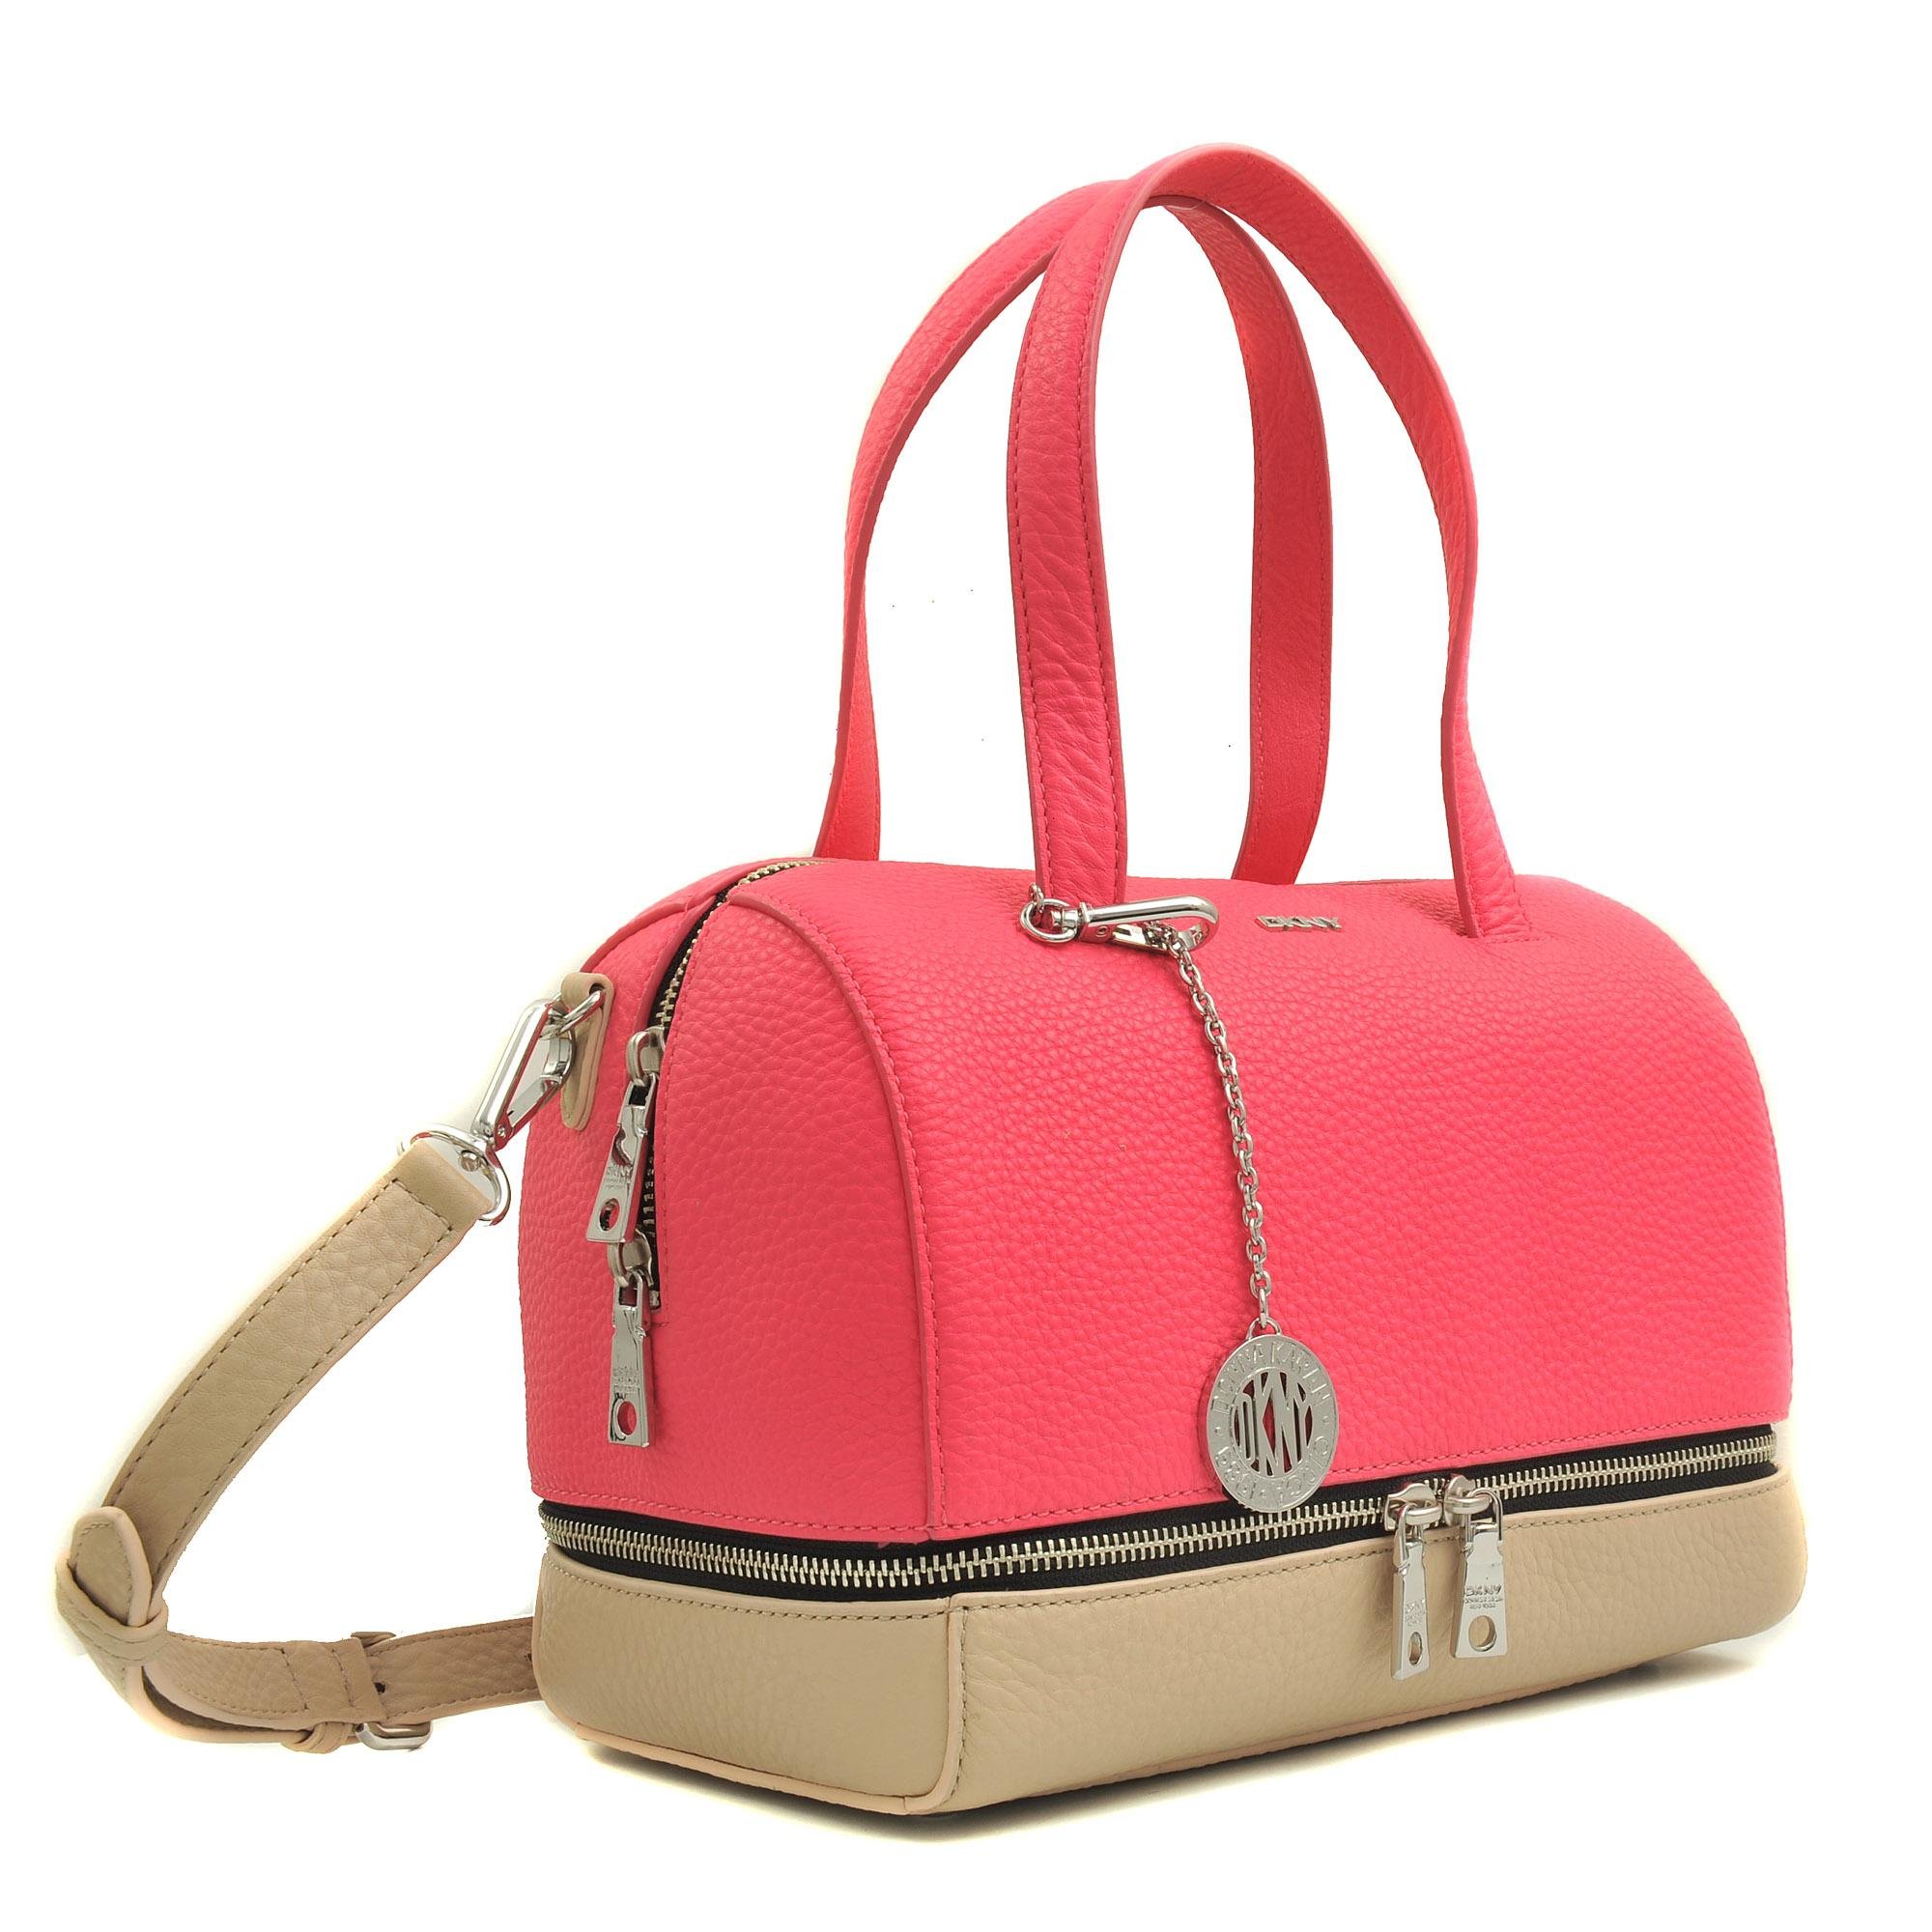 Dkny Small Satchel Tribeca Bag in Pink | Lyst